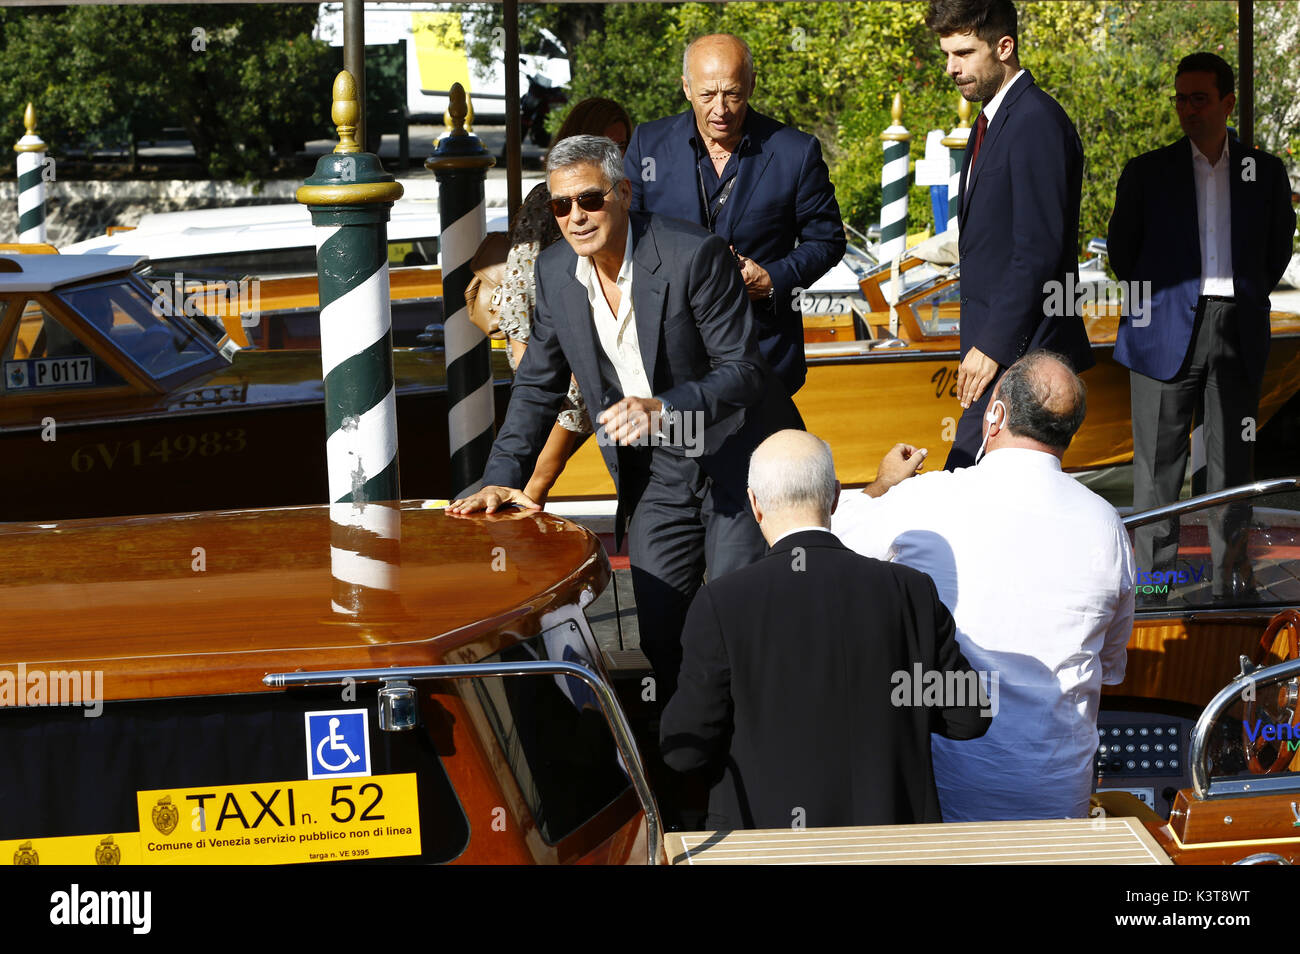 Venice, Italy. 01st Sep, 2017. George Clooney is seen leaving the Hotel Excelsior after giving interviews during the 74th Venice Film Festival on September 01, 2017 in Venice, Italy | usage worldwide Credit: dpa/Alamy Live News Stock Photo